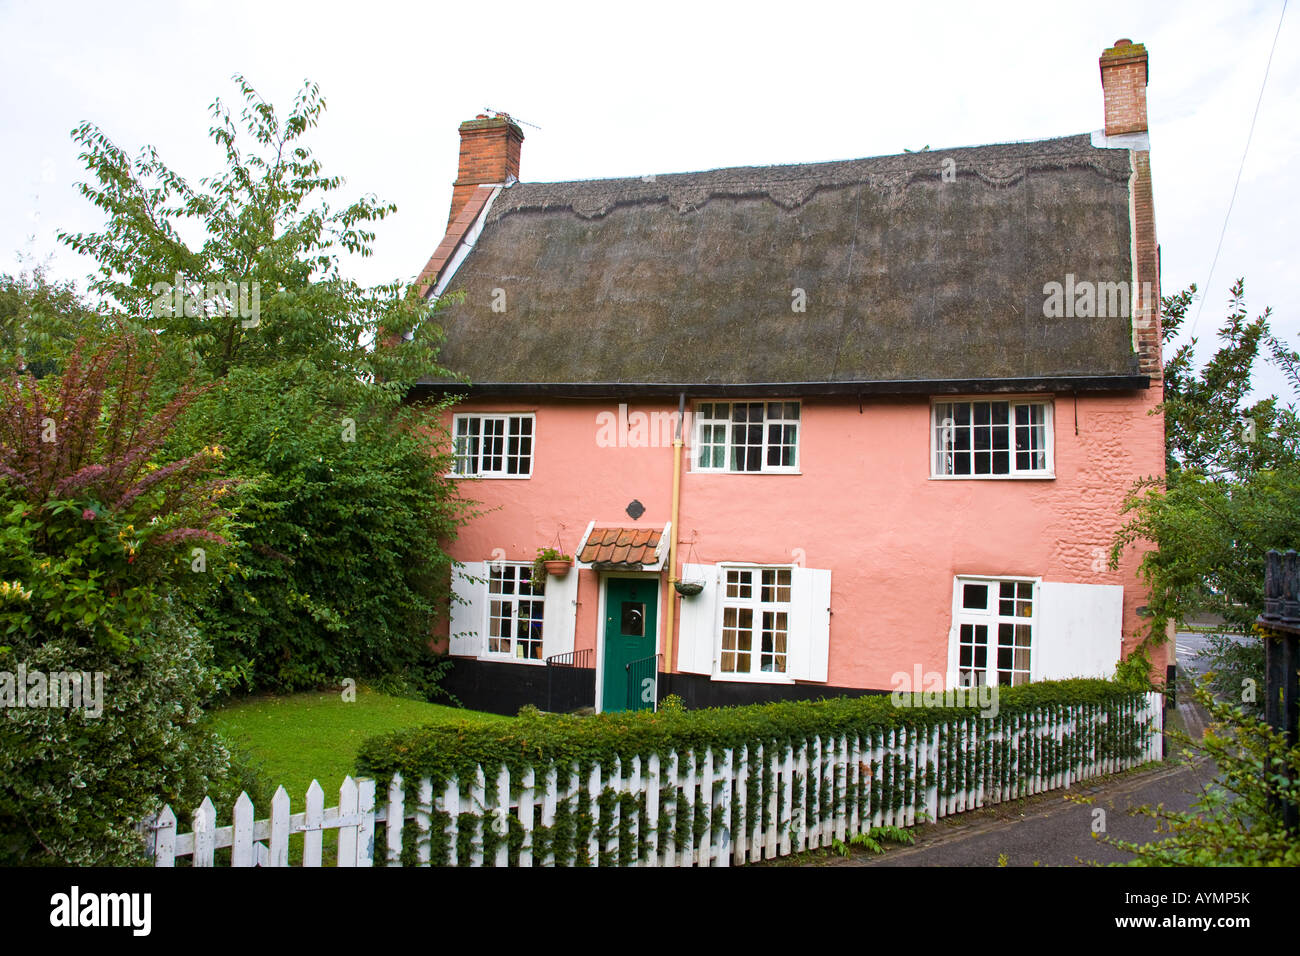 Historic And Picturesque Pink Thatched Cottage With Garden And